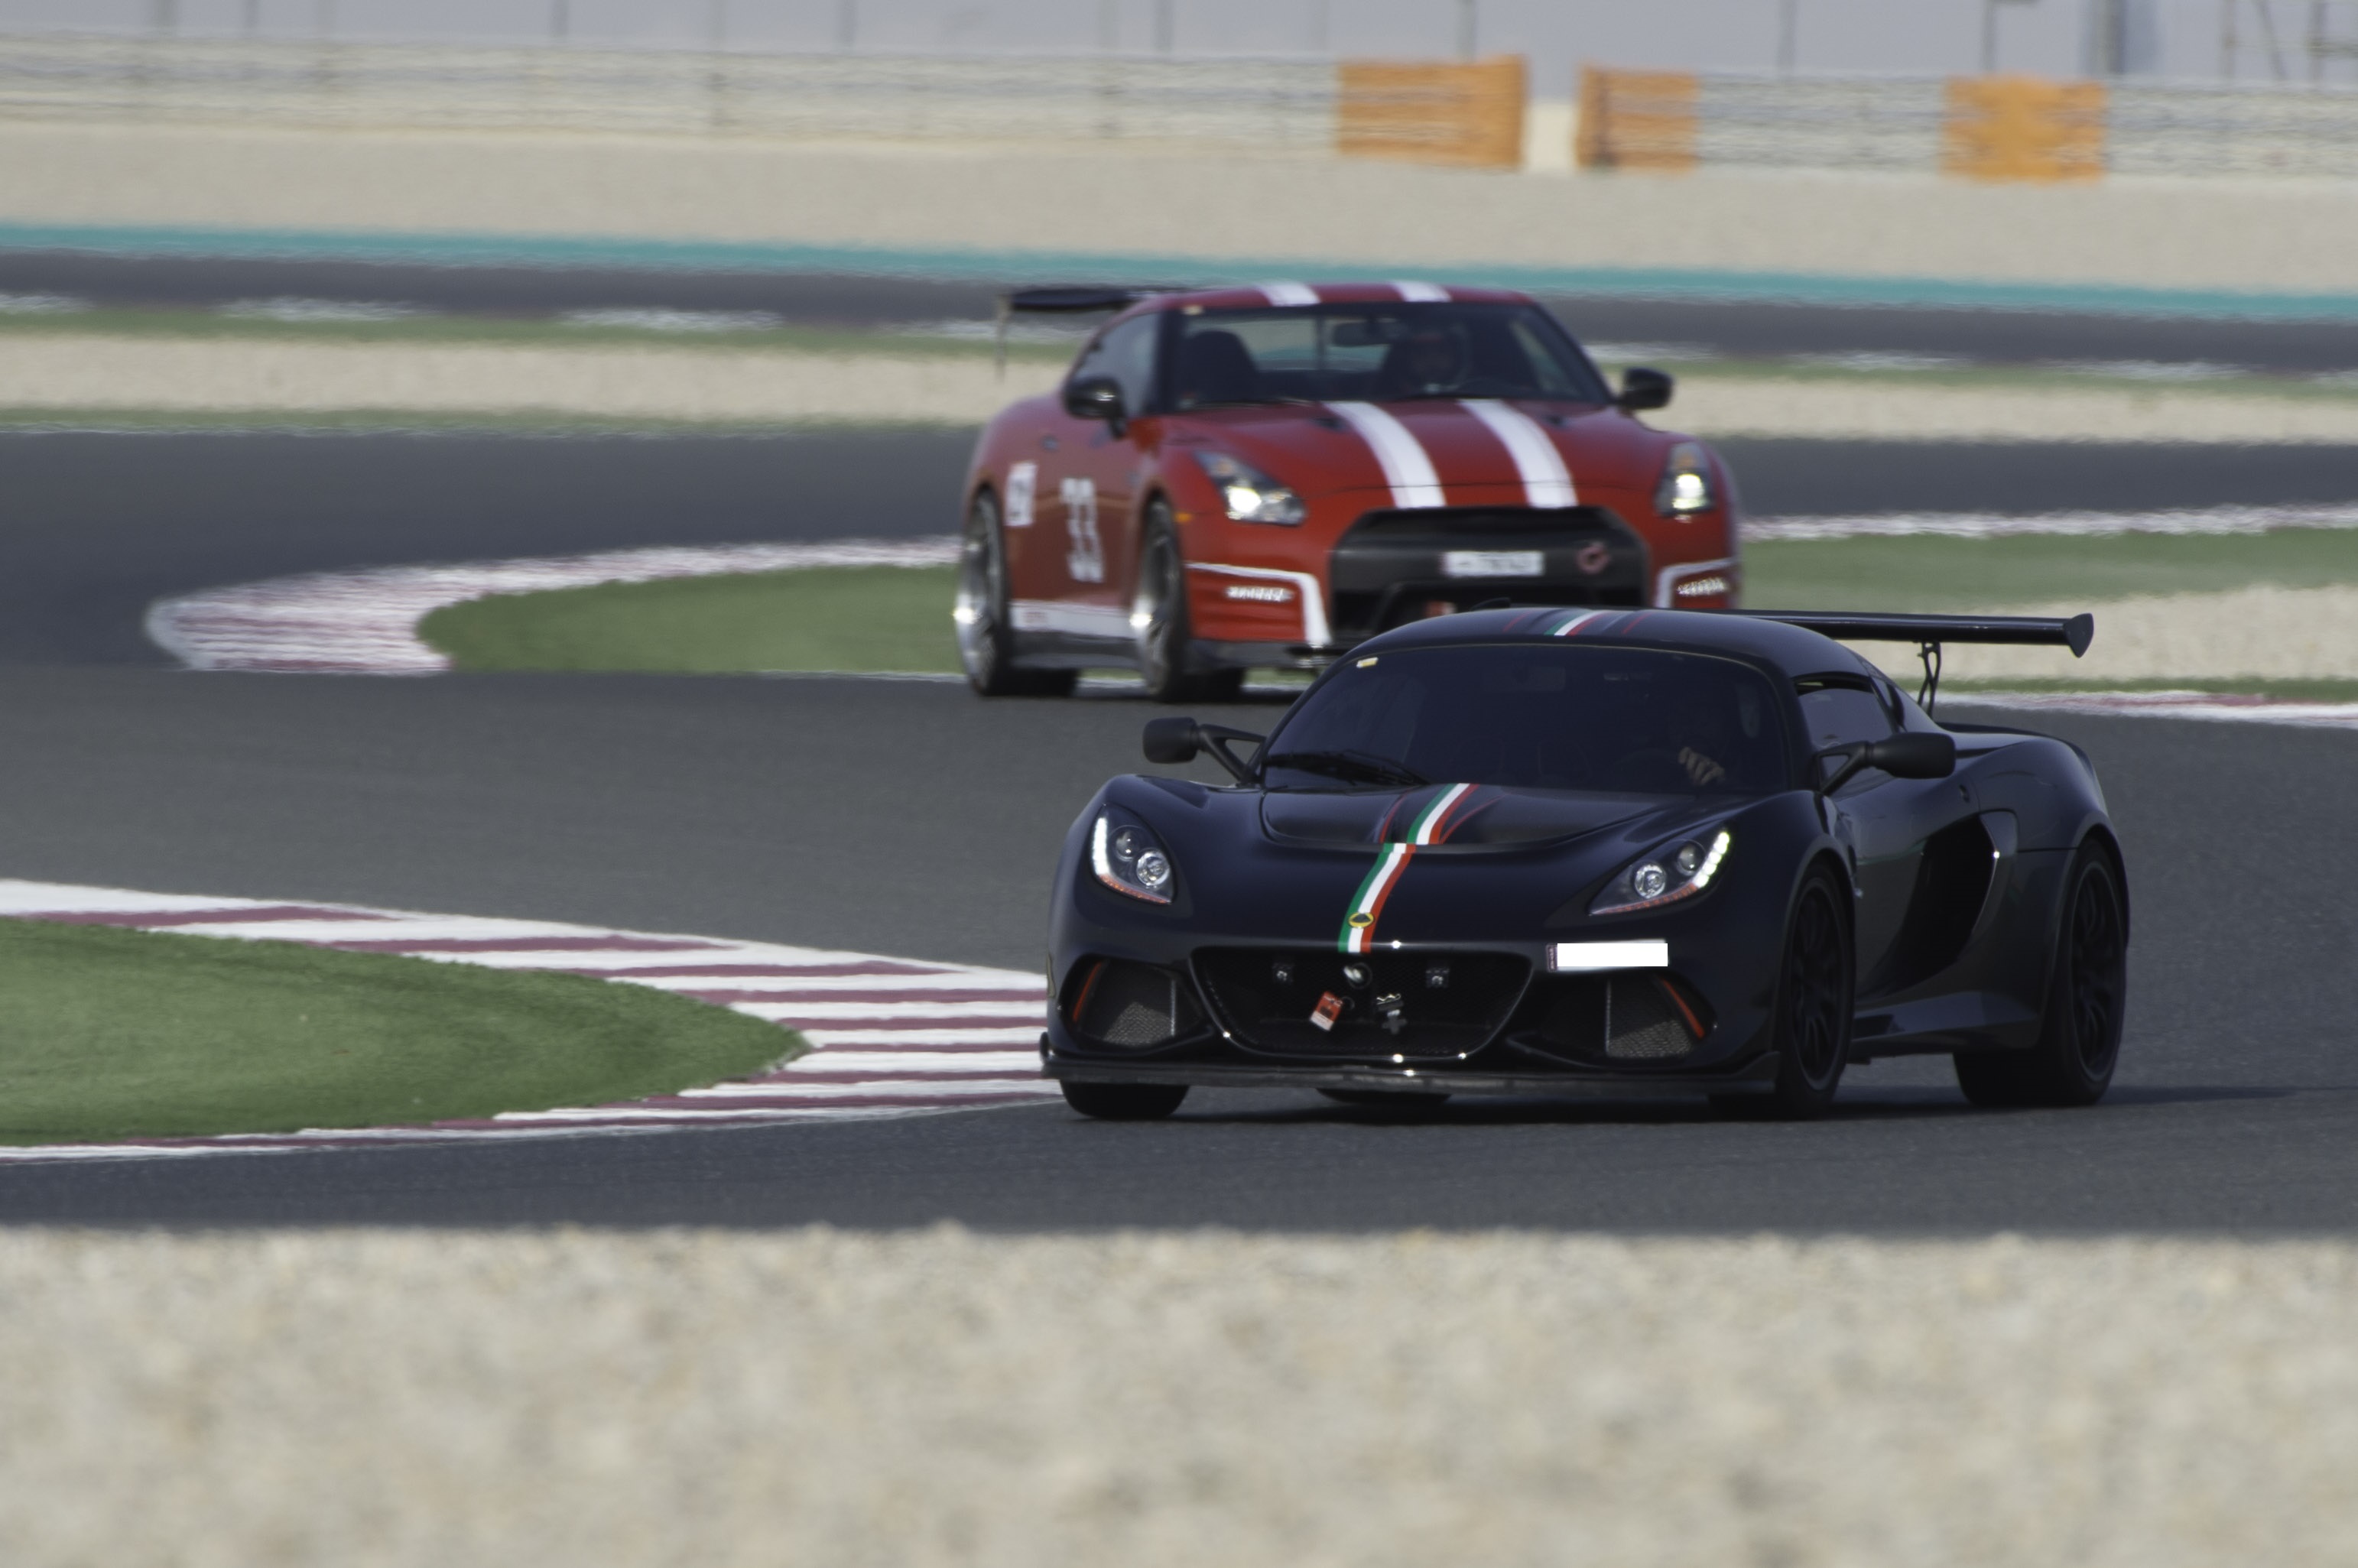 Track Days are back at Lusail Circuit Sports Club